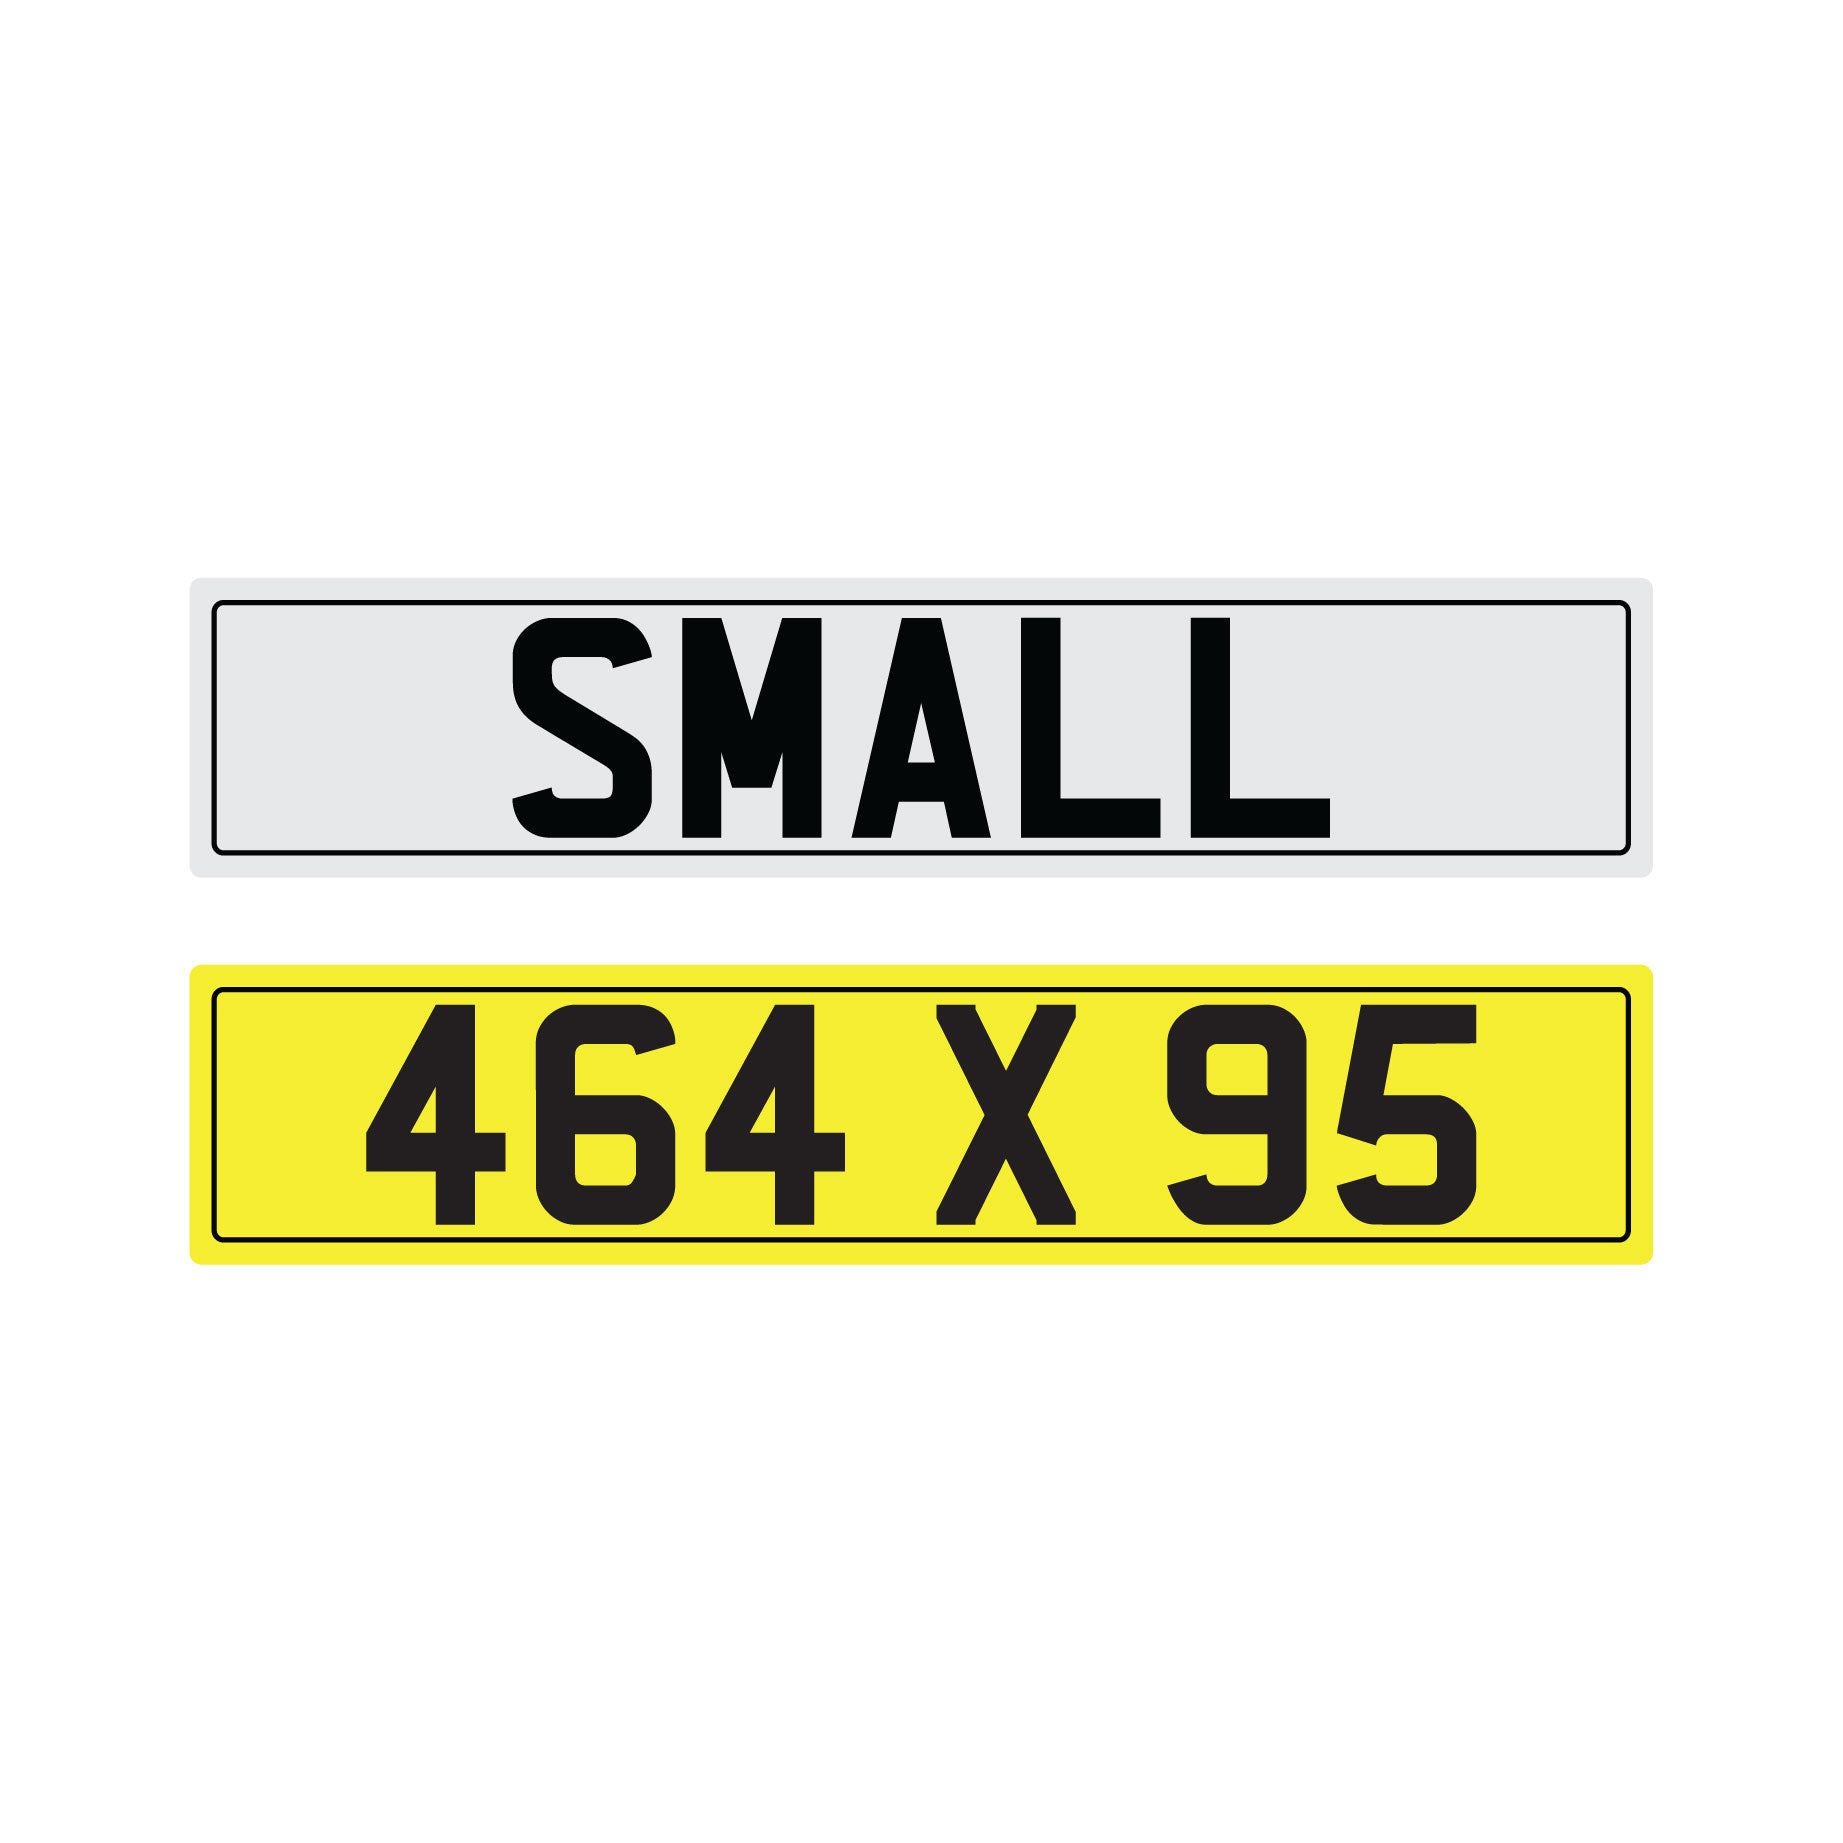 Plate sizes number Displaying number